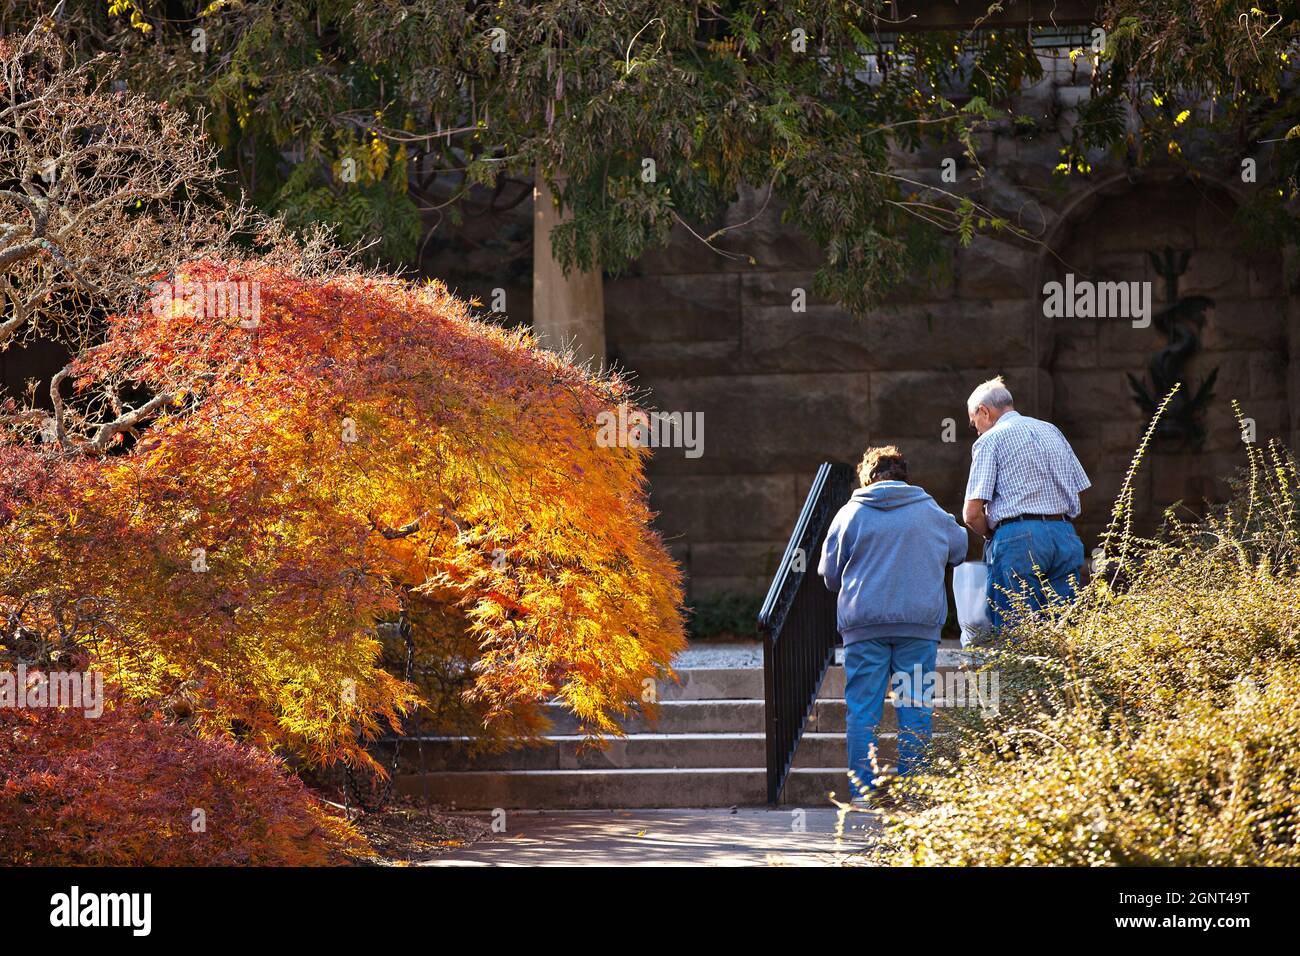 An elderly couple walks around the walled gardens of the Biltmore Estate during autumn in Asheville, North Carolina. The house, privately owned by the Vanderbilt family, is the largest home in America with over 250 rooms. Stock Photo